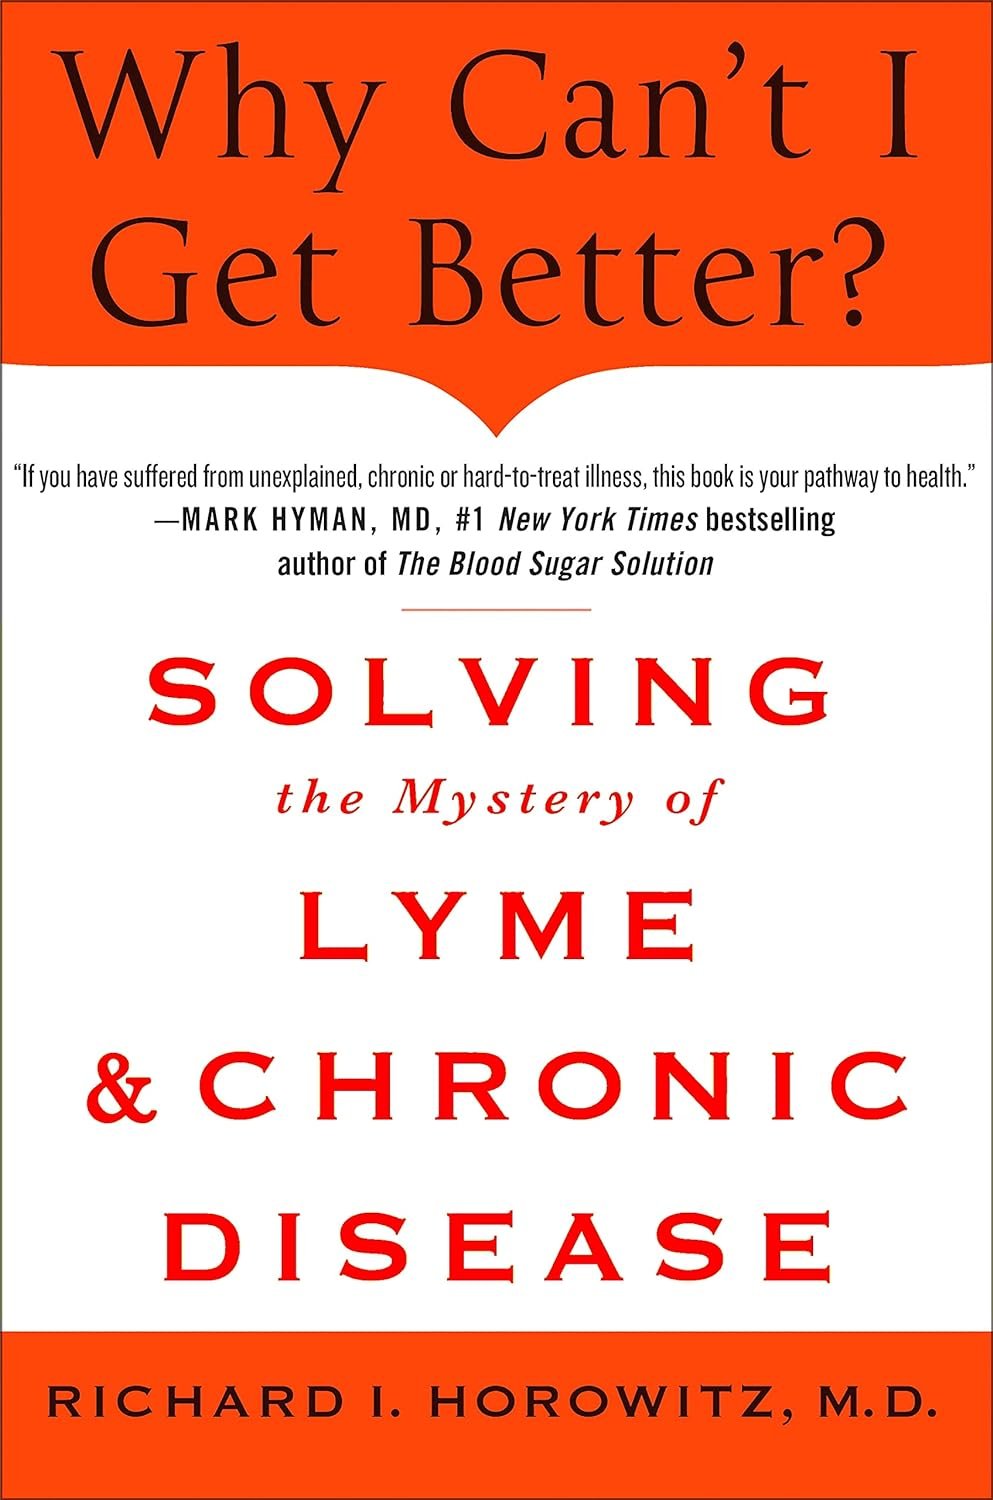 Why Can't I Get Better? Solving the Mystery of Lyme and Chronic Disease: Solving the Mystery of Lyme and Chronic Disease